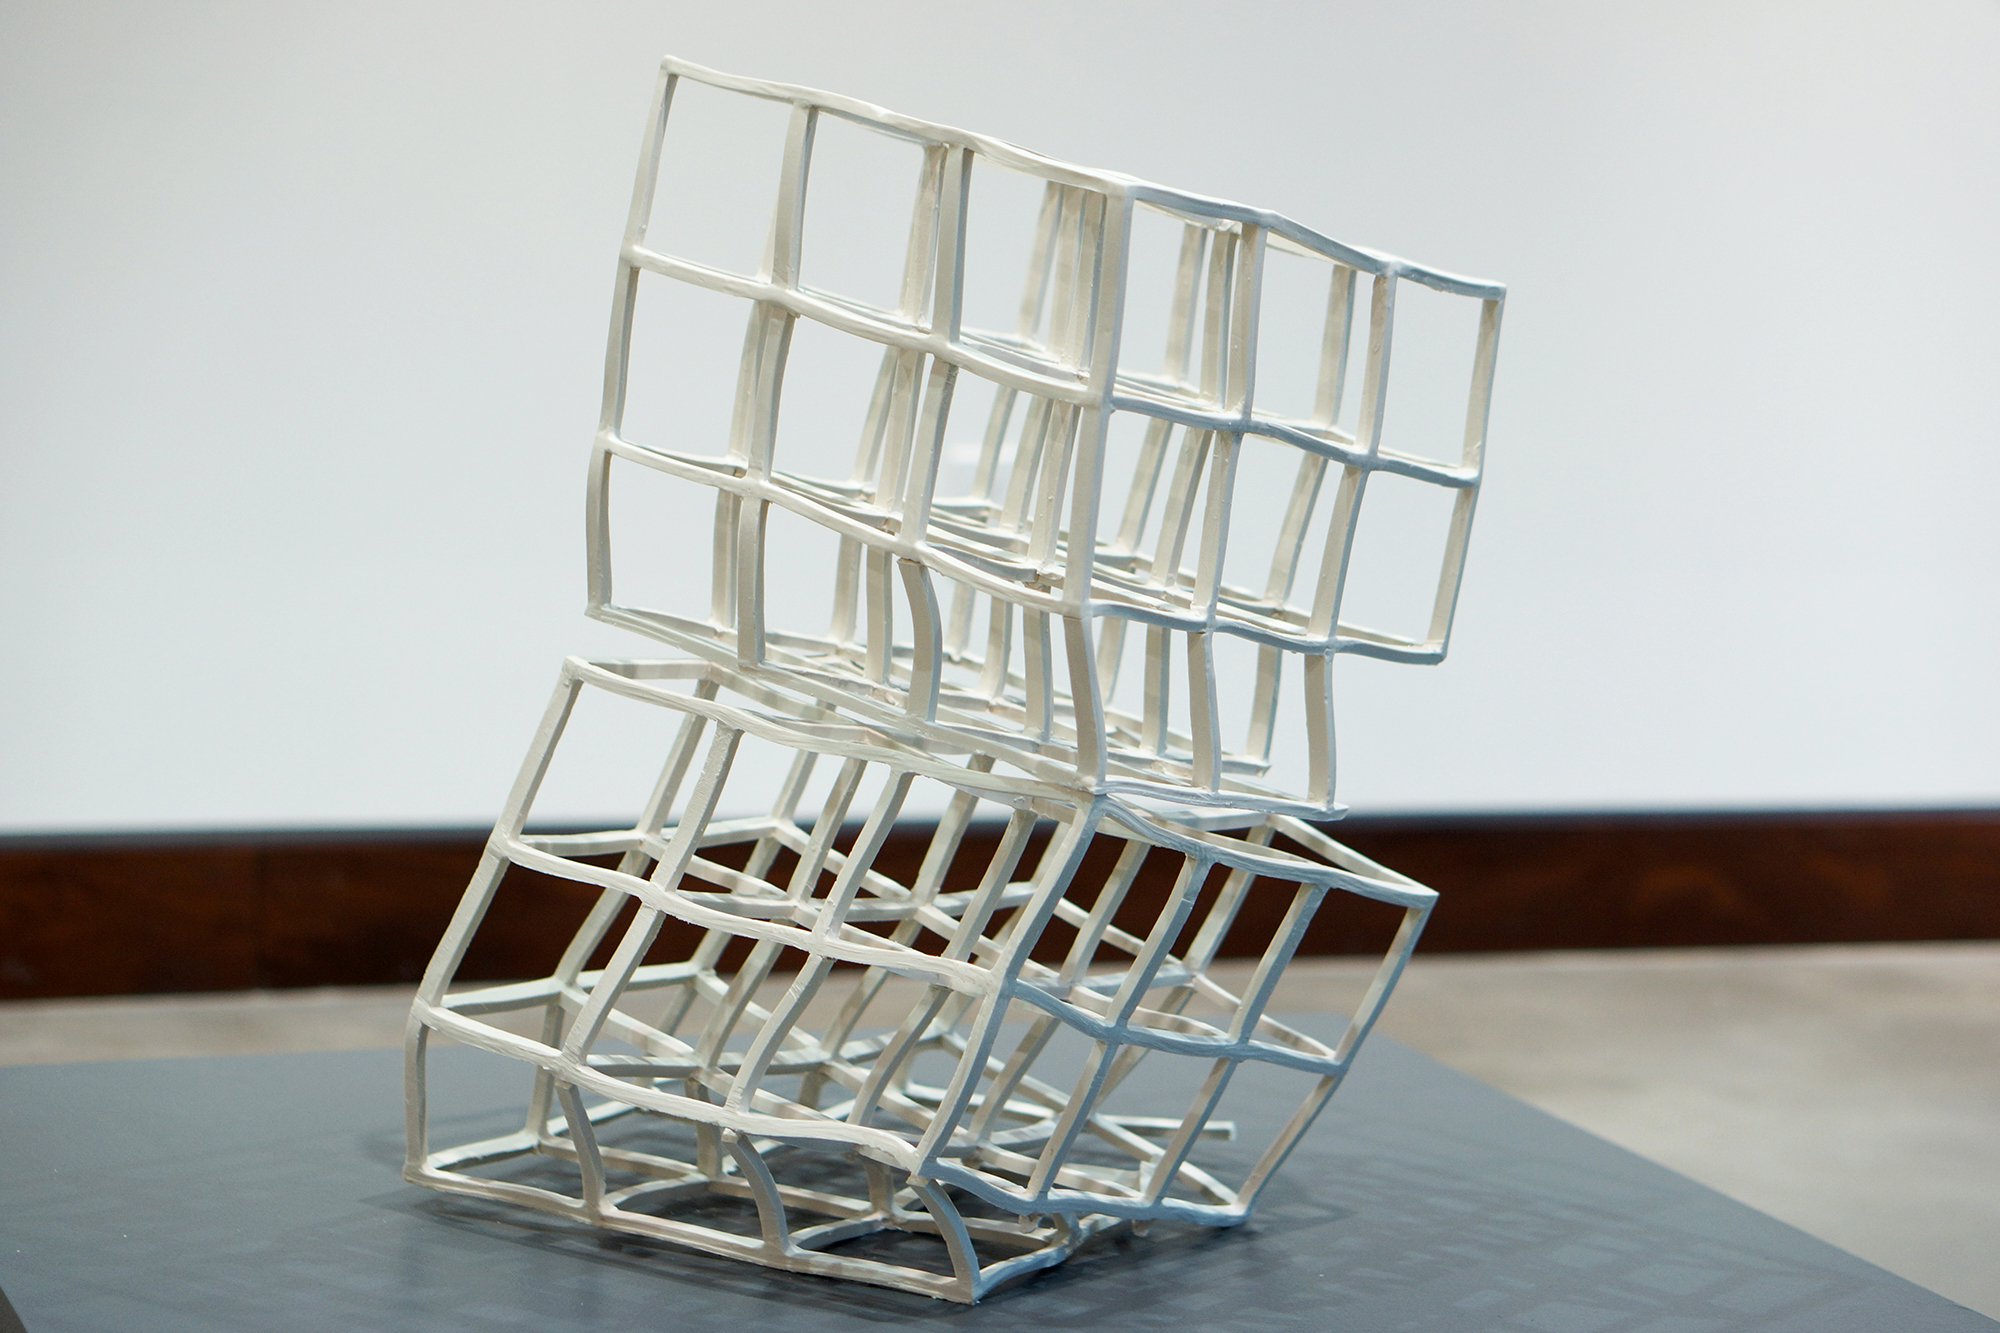  Free standing grid sculpture created by Lauren HB Studio available for commission and display 